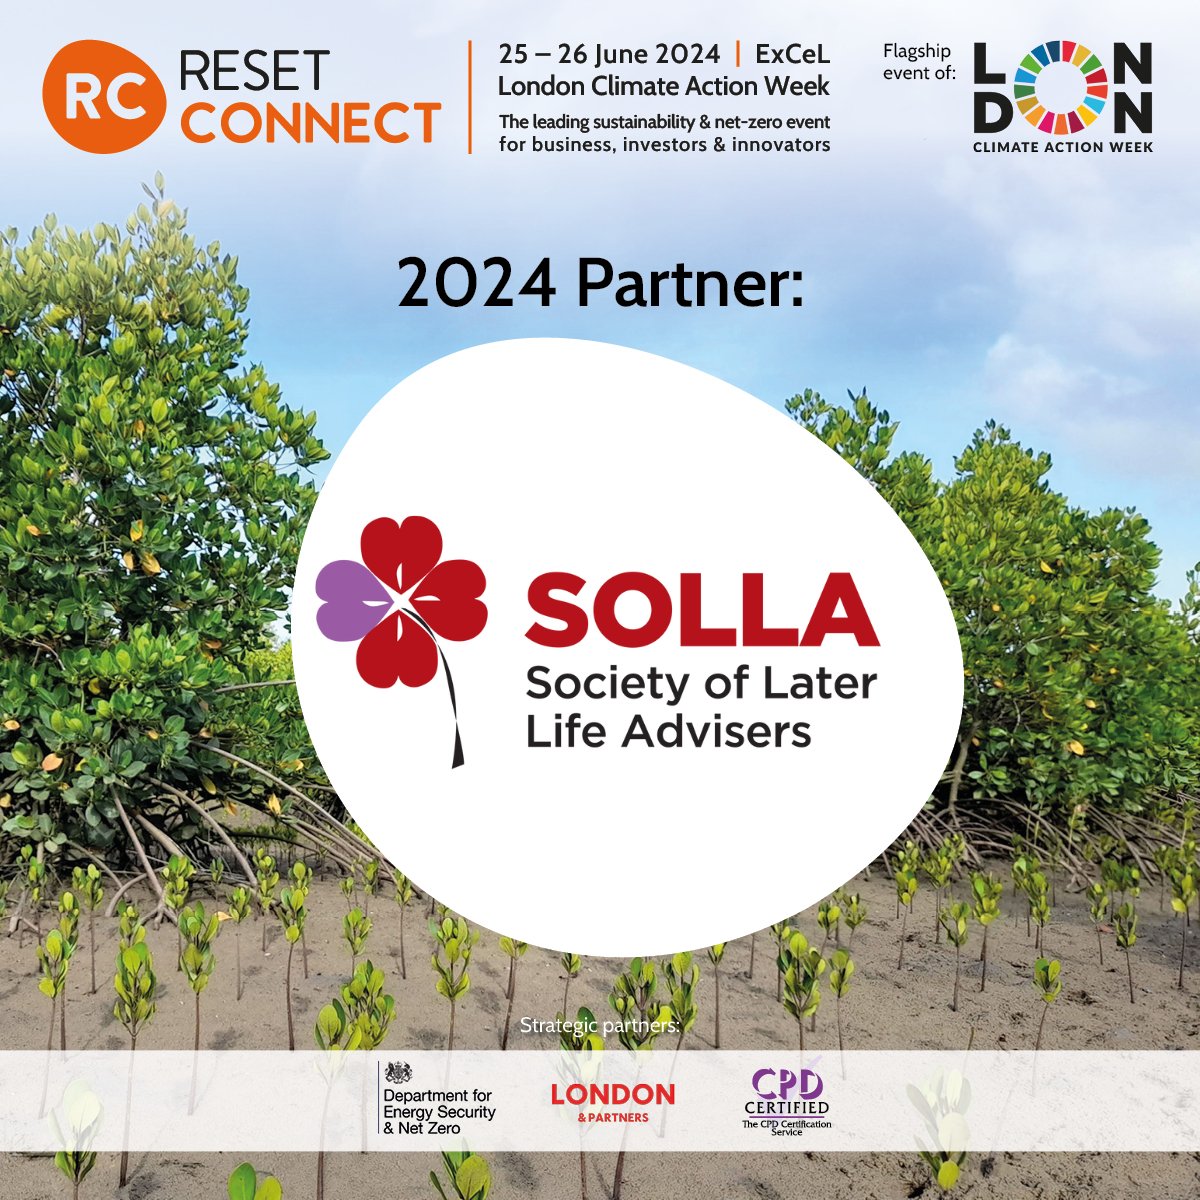 🌹@SOLLAadvice is a ‘not for profit’ organisation that helps older people and their families find trusted accredited financial advisers who specialise in the financial needs of those in later life. Find out more: societyoflaterlifeadvisers.co.uk
#LCAW2024 #rcl24 #SOLLA #FinancialAdvisers